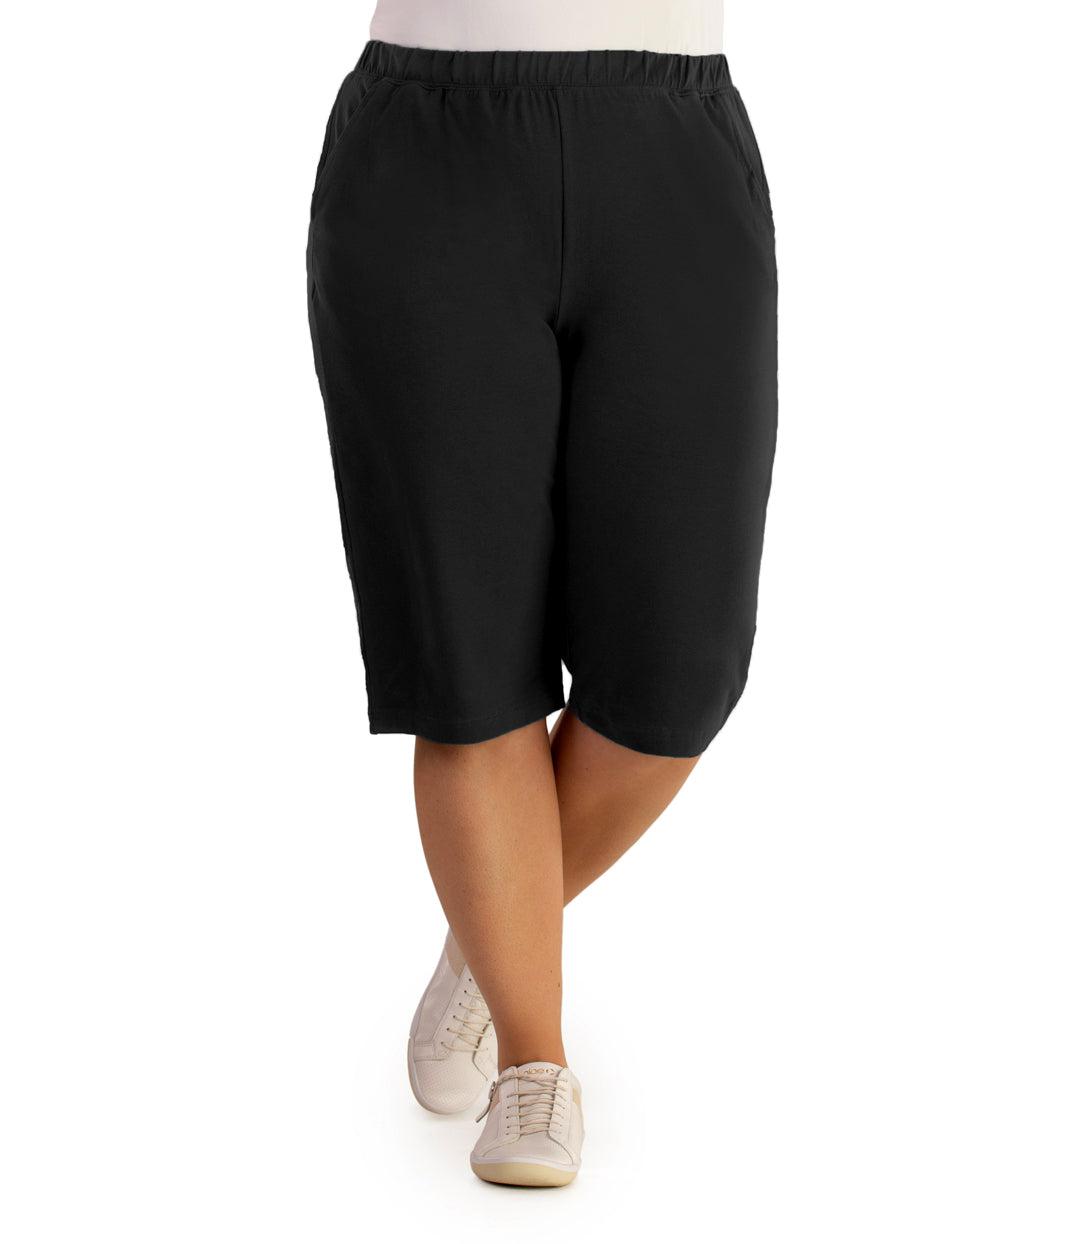 Bottom half of plus sized woman, front view, wearing JunoActive Stretch Naturals Bermuda Shorts in color black. Bottom hem is at the knee.